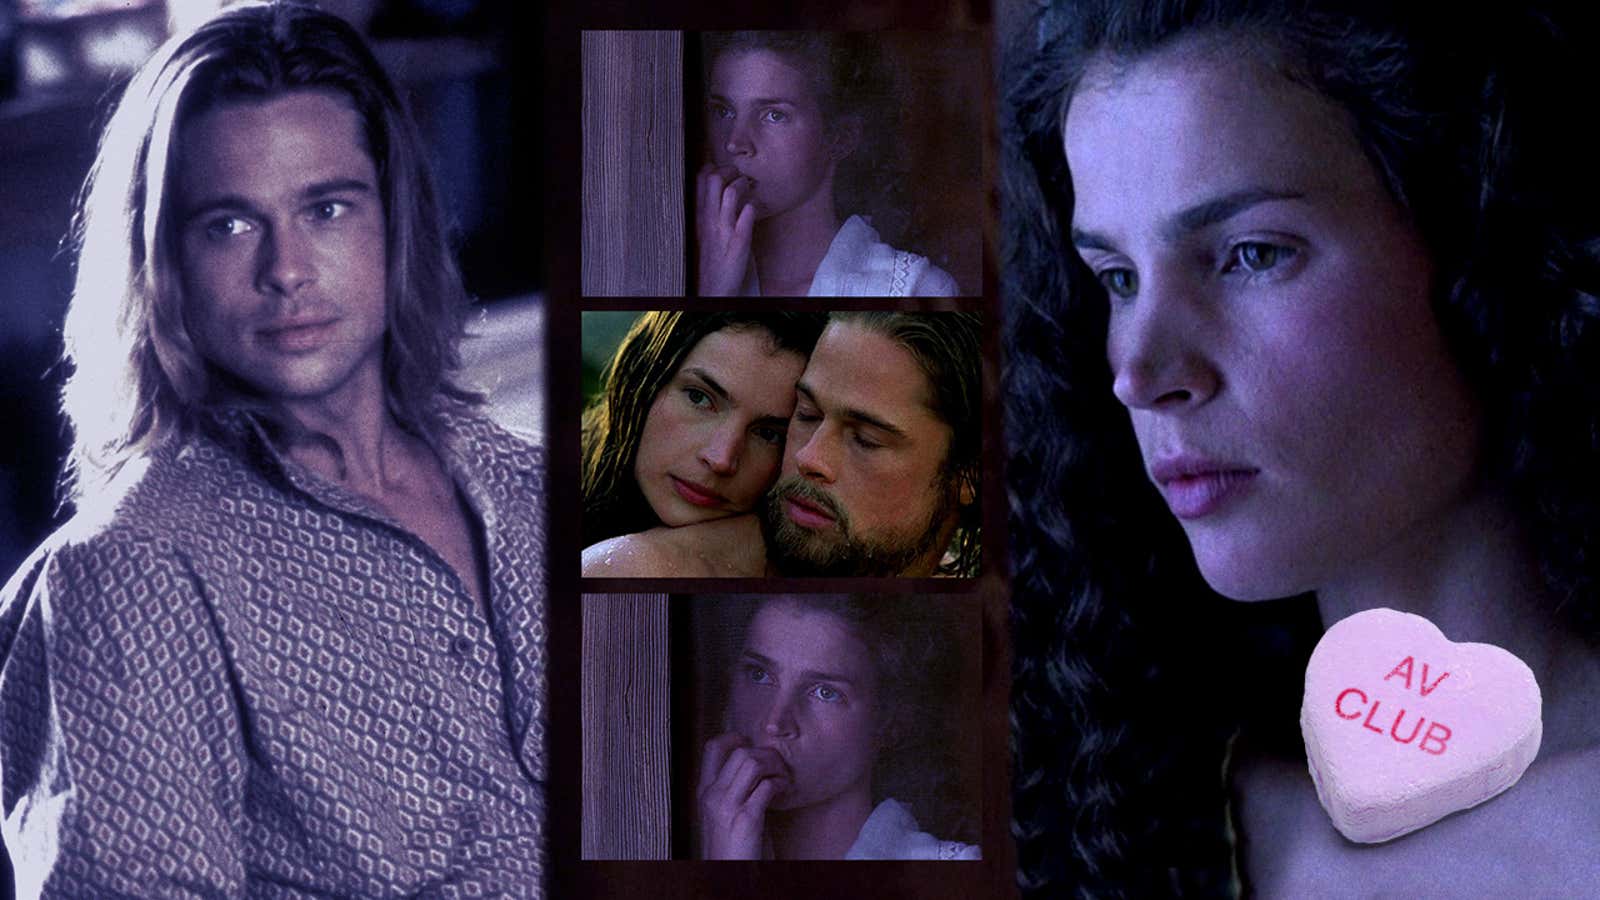 Brad Pitt and Julia Ormond in Legends Of The Fall (Photos: Far left, Liaison/Getty Images; all others, screenshots)